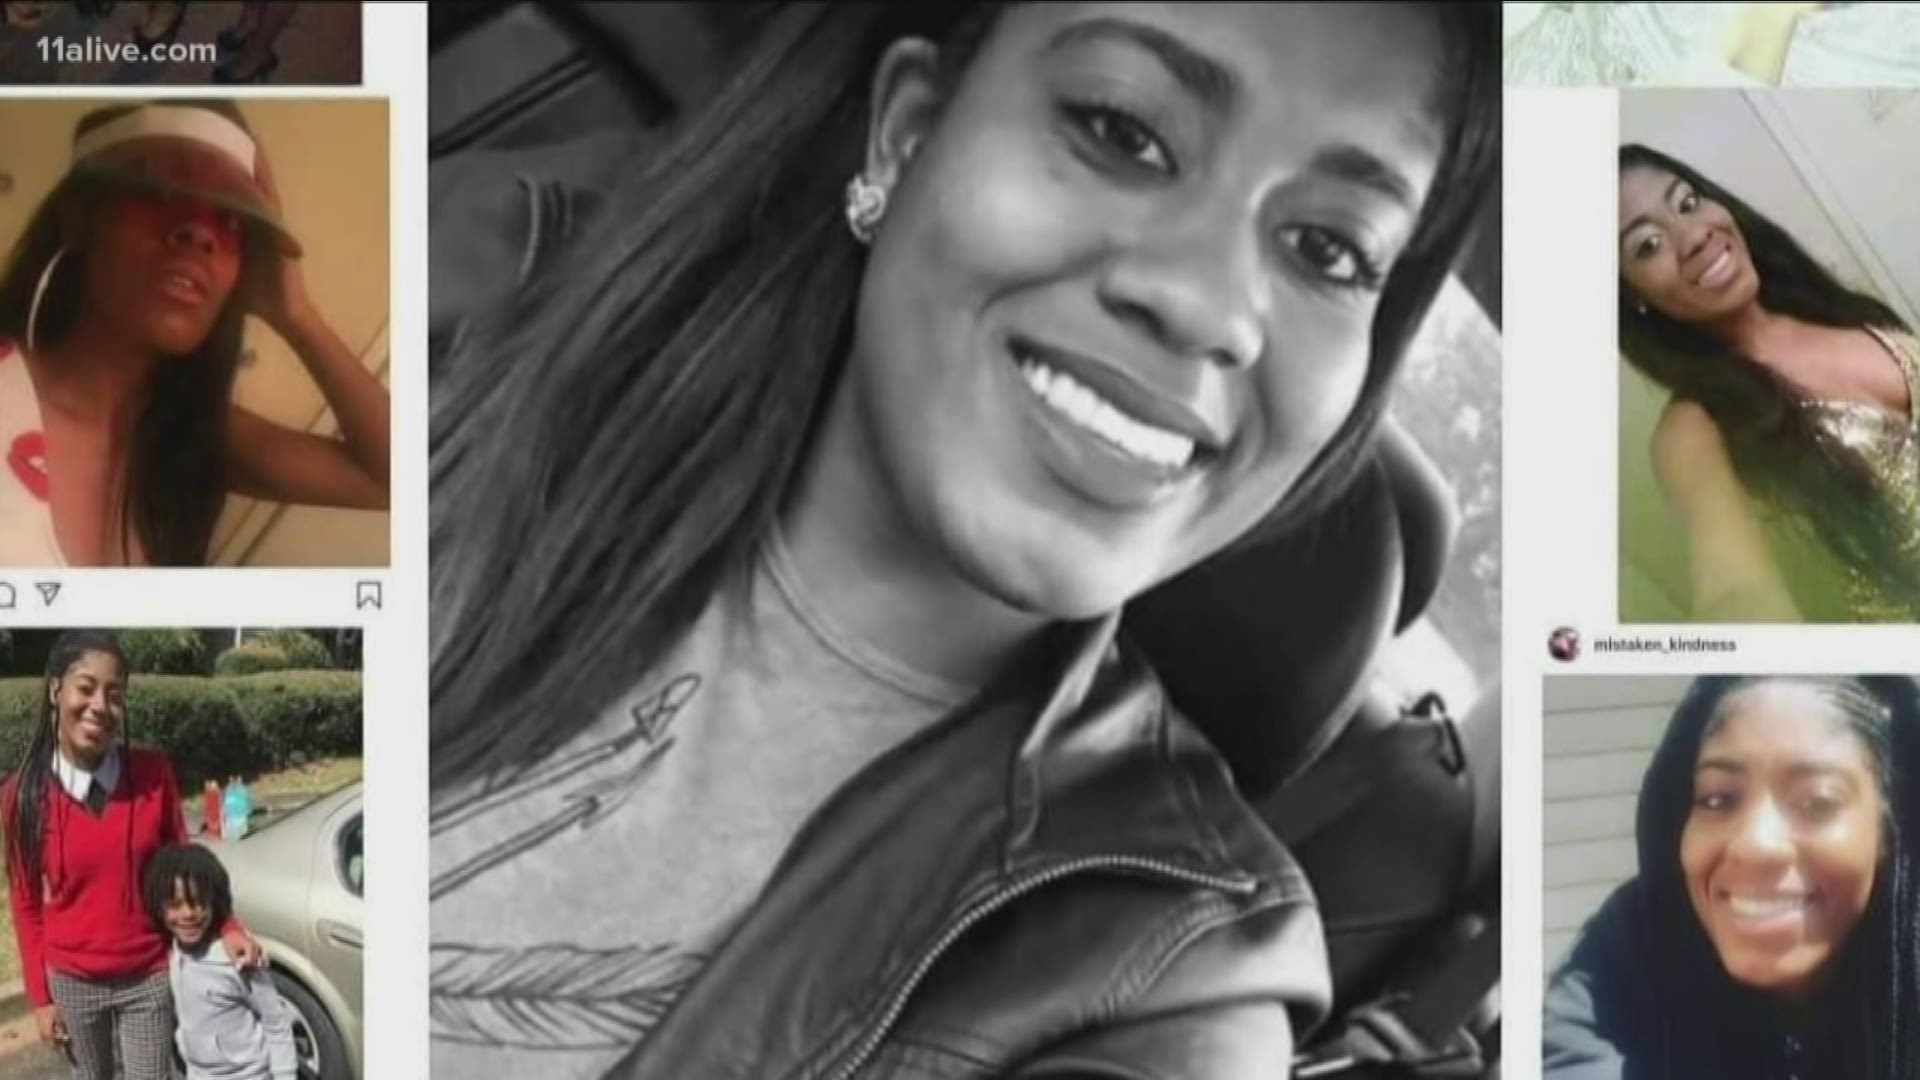 Tanya Story said her daughter, 26-year-old Latiesha Edwards, was last seen leaving a house in the West End area of Atlanta on Friday.